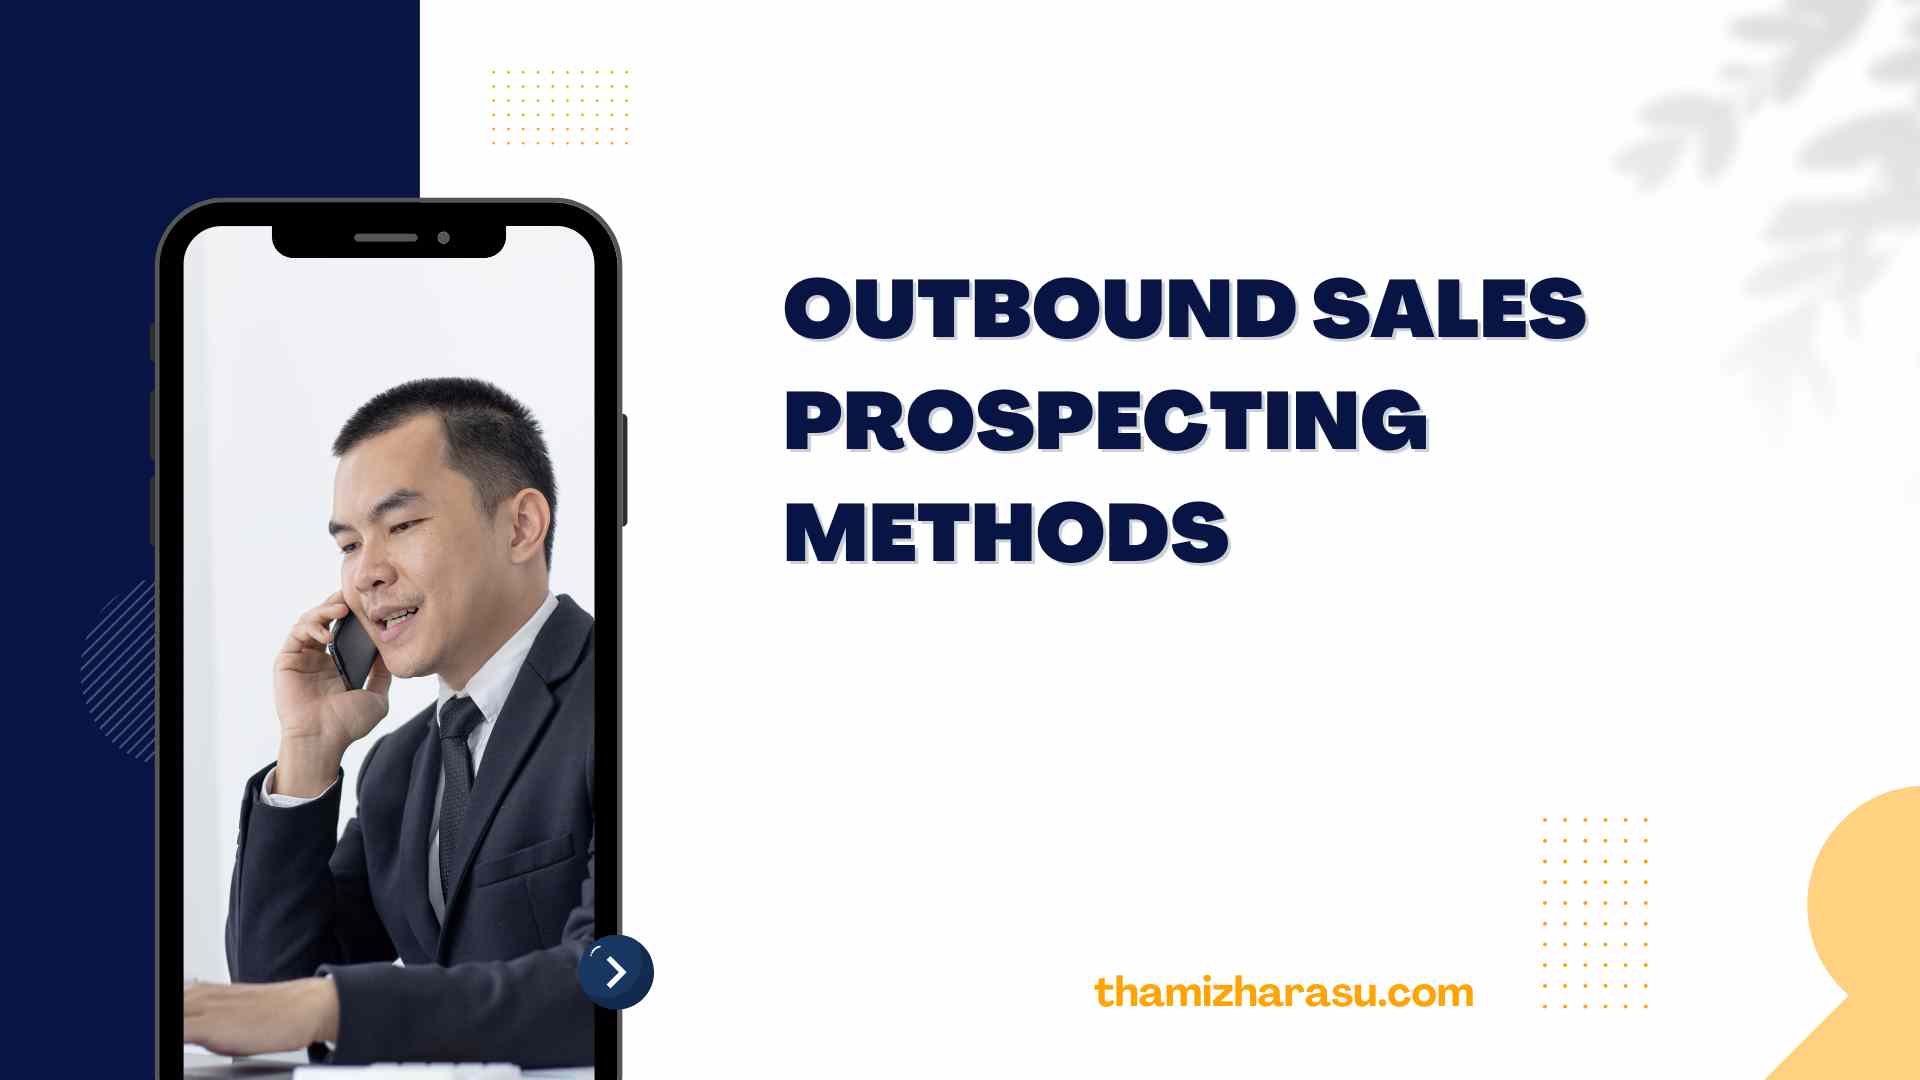 Outbound sales prospecting methods